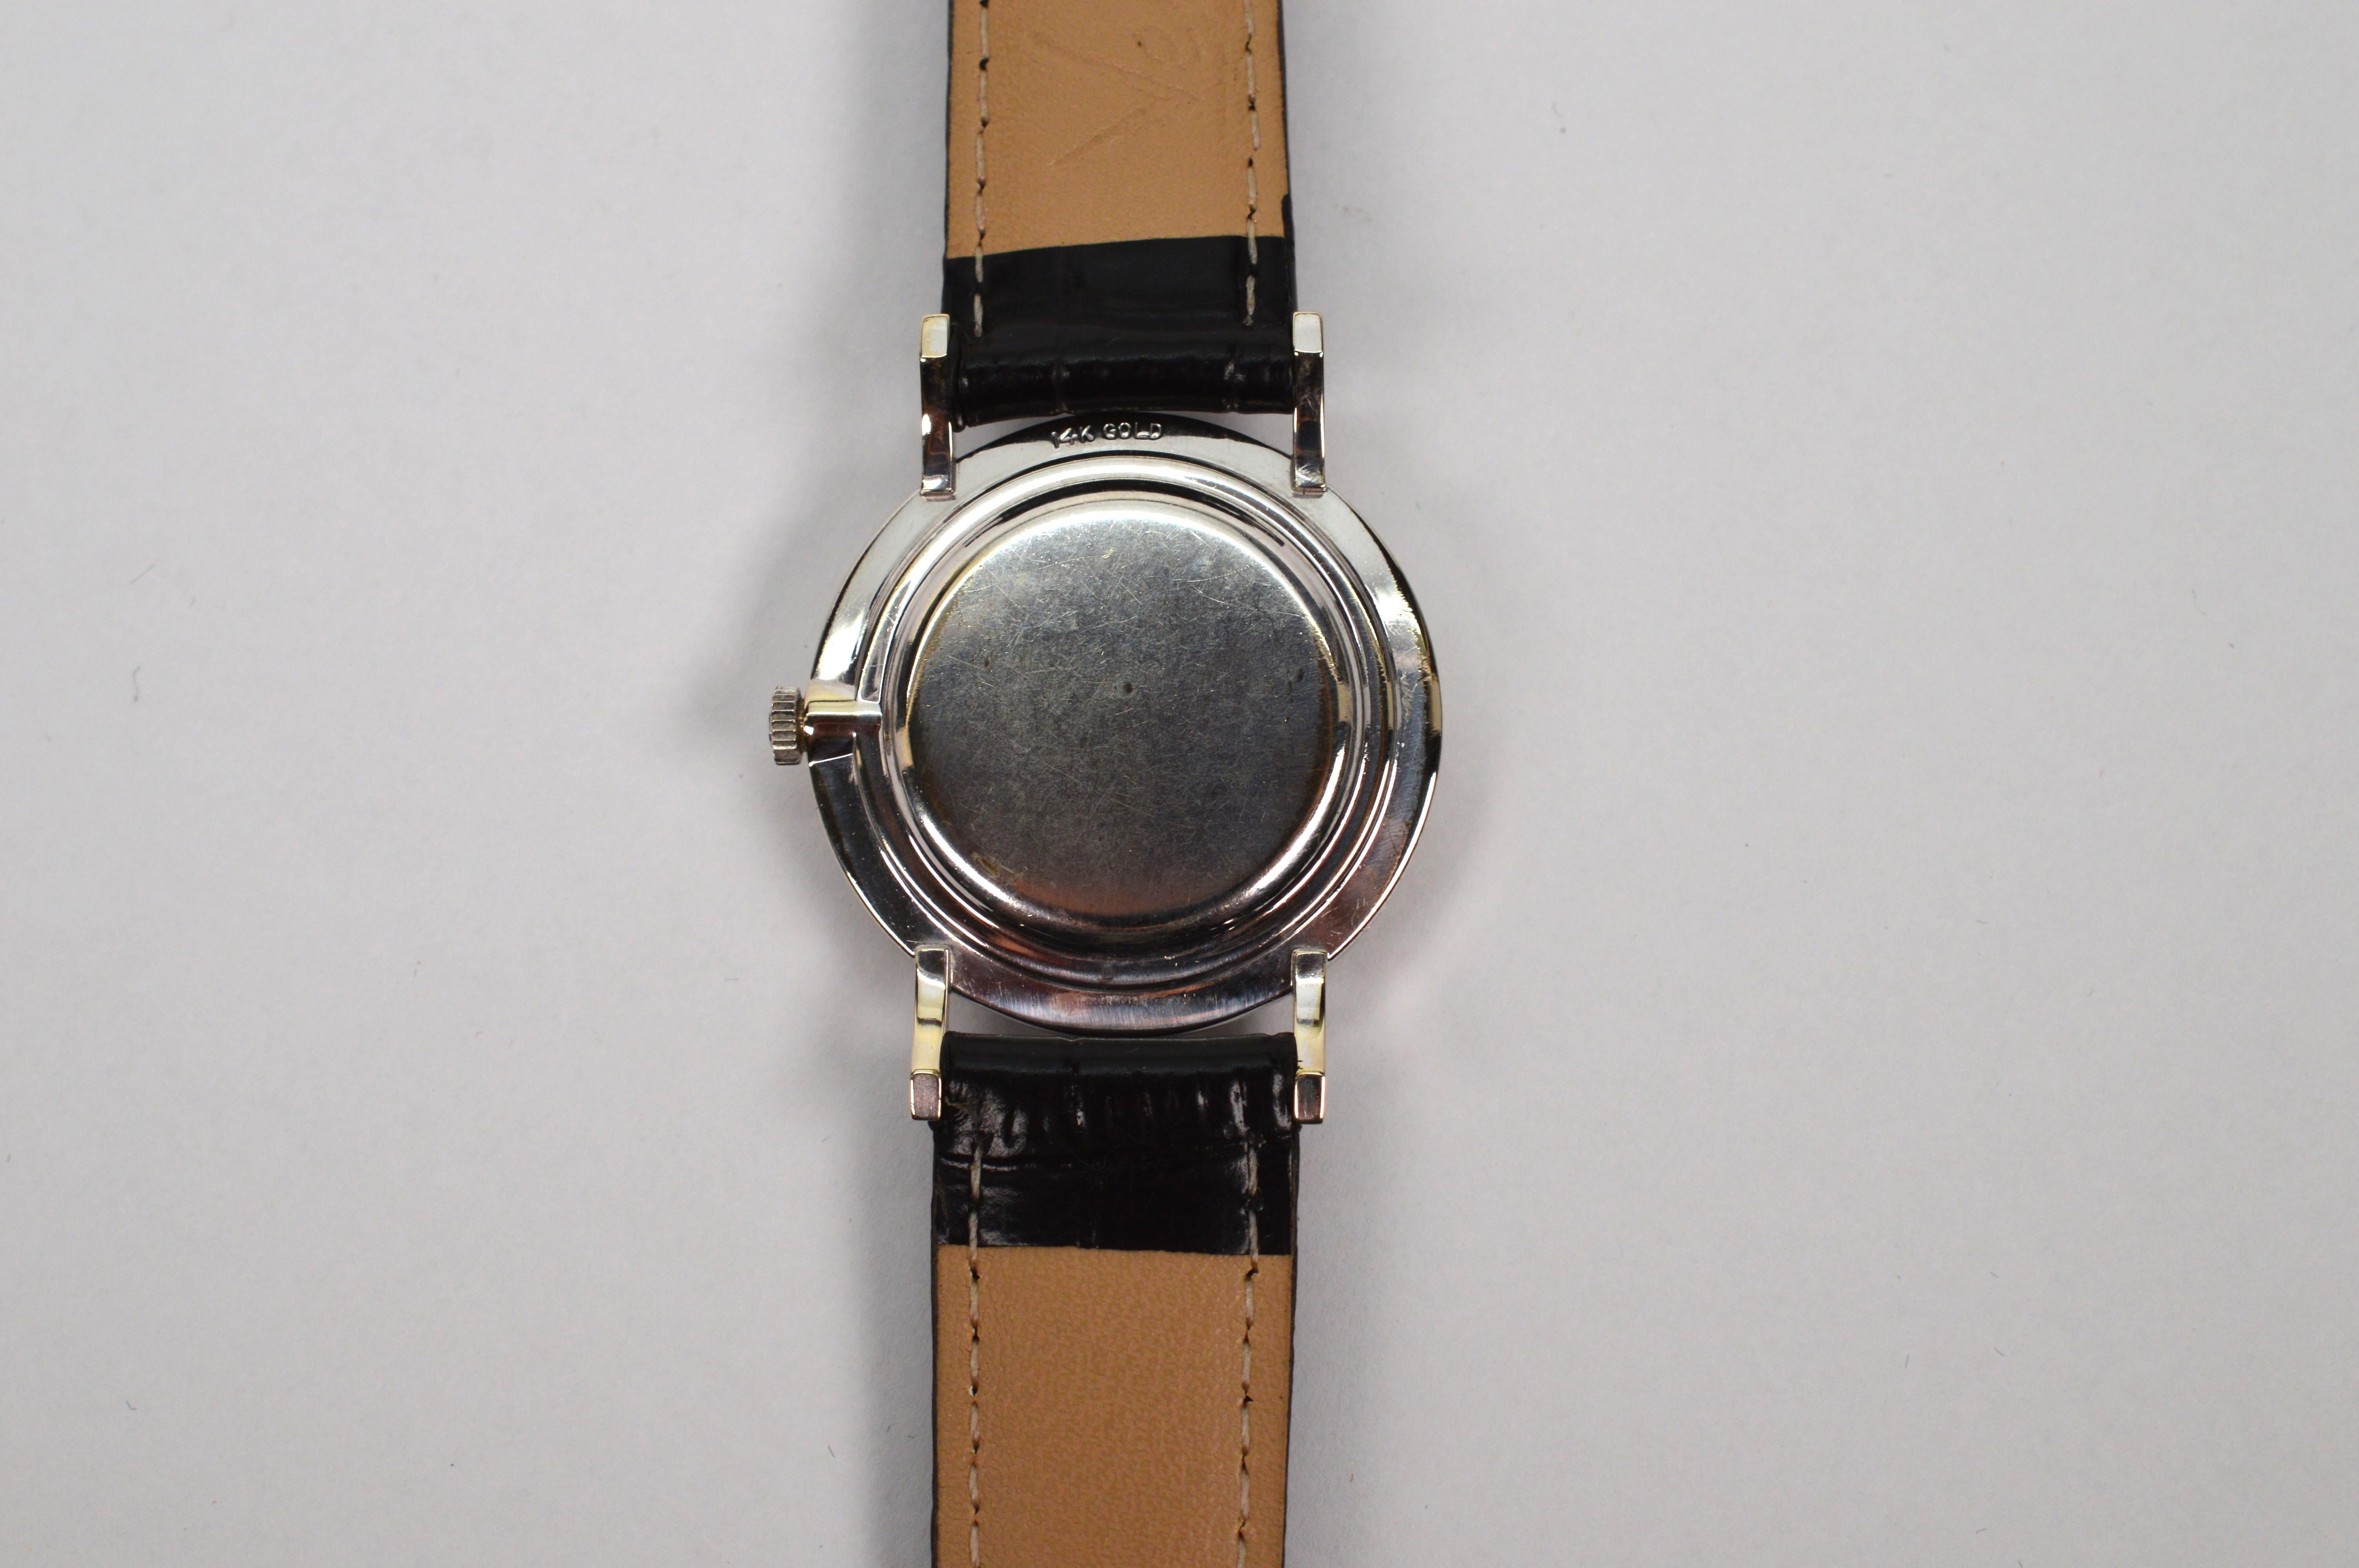 Classic Omega 302 14K White Gold Men's Wrist Watch In Good Condition For Sale In Mount Kisco, NY